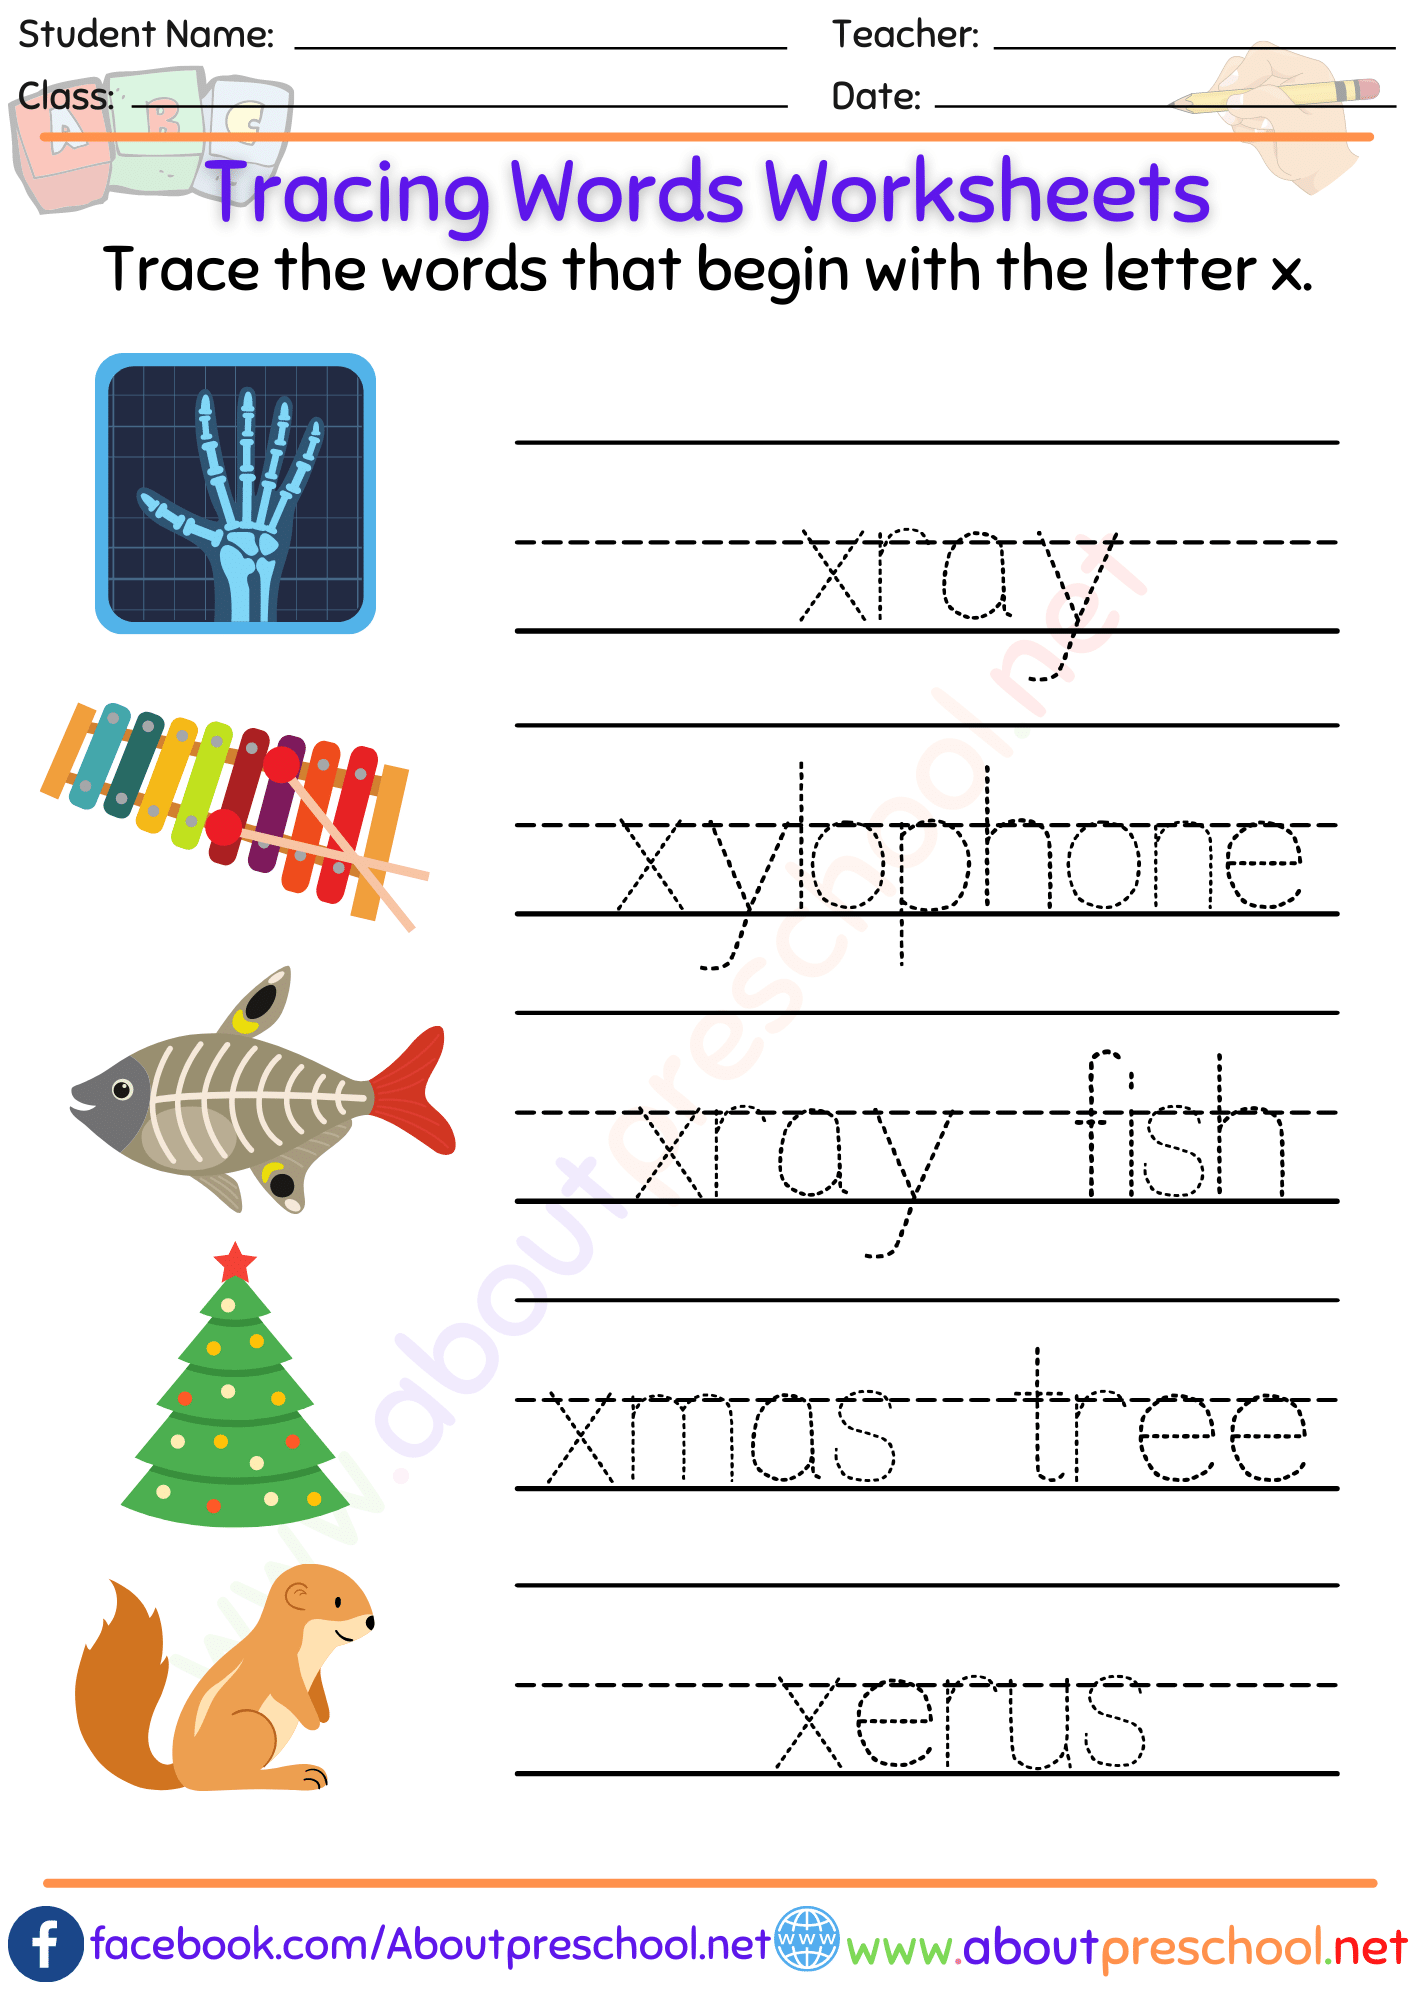 Tracing Words Worksheets-x